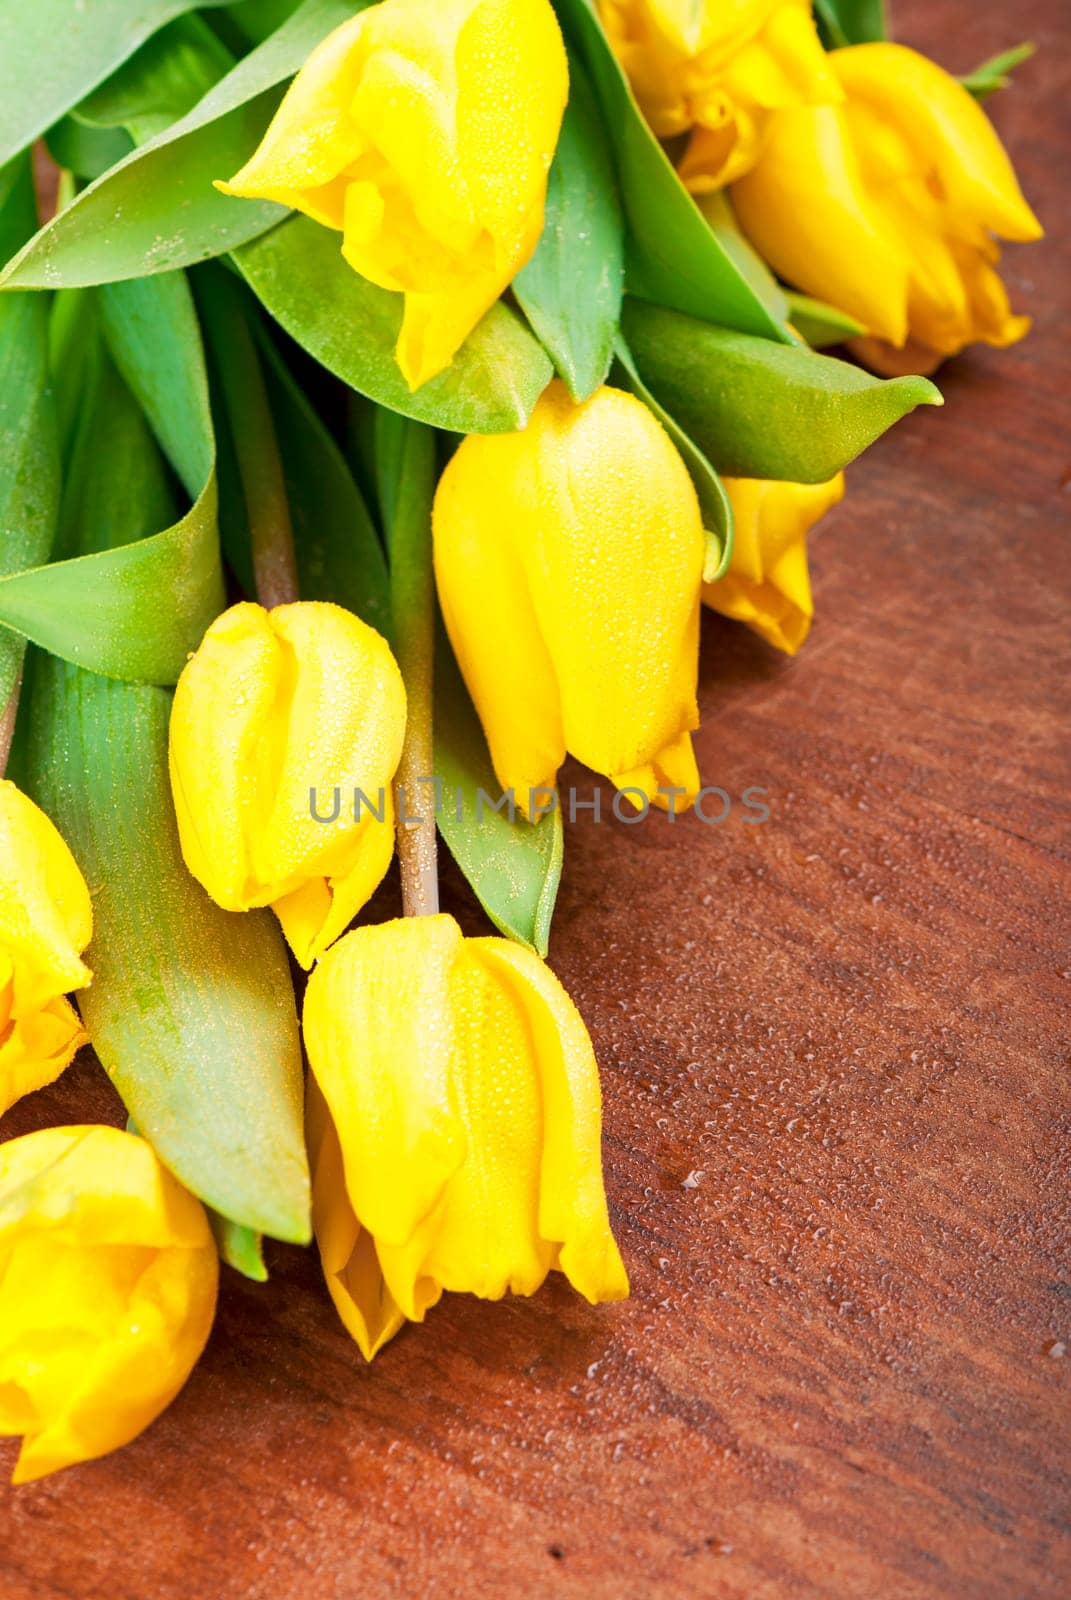 Yellow tulips on a wooden surface. Studio photography.